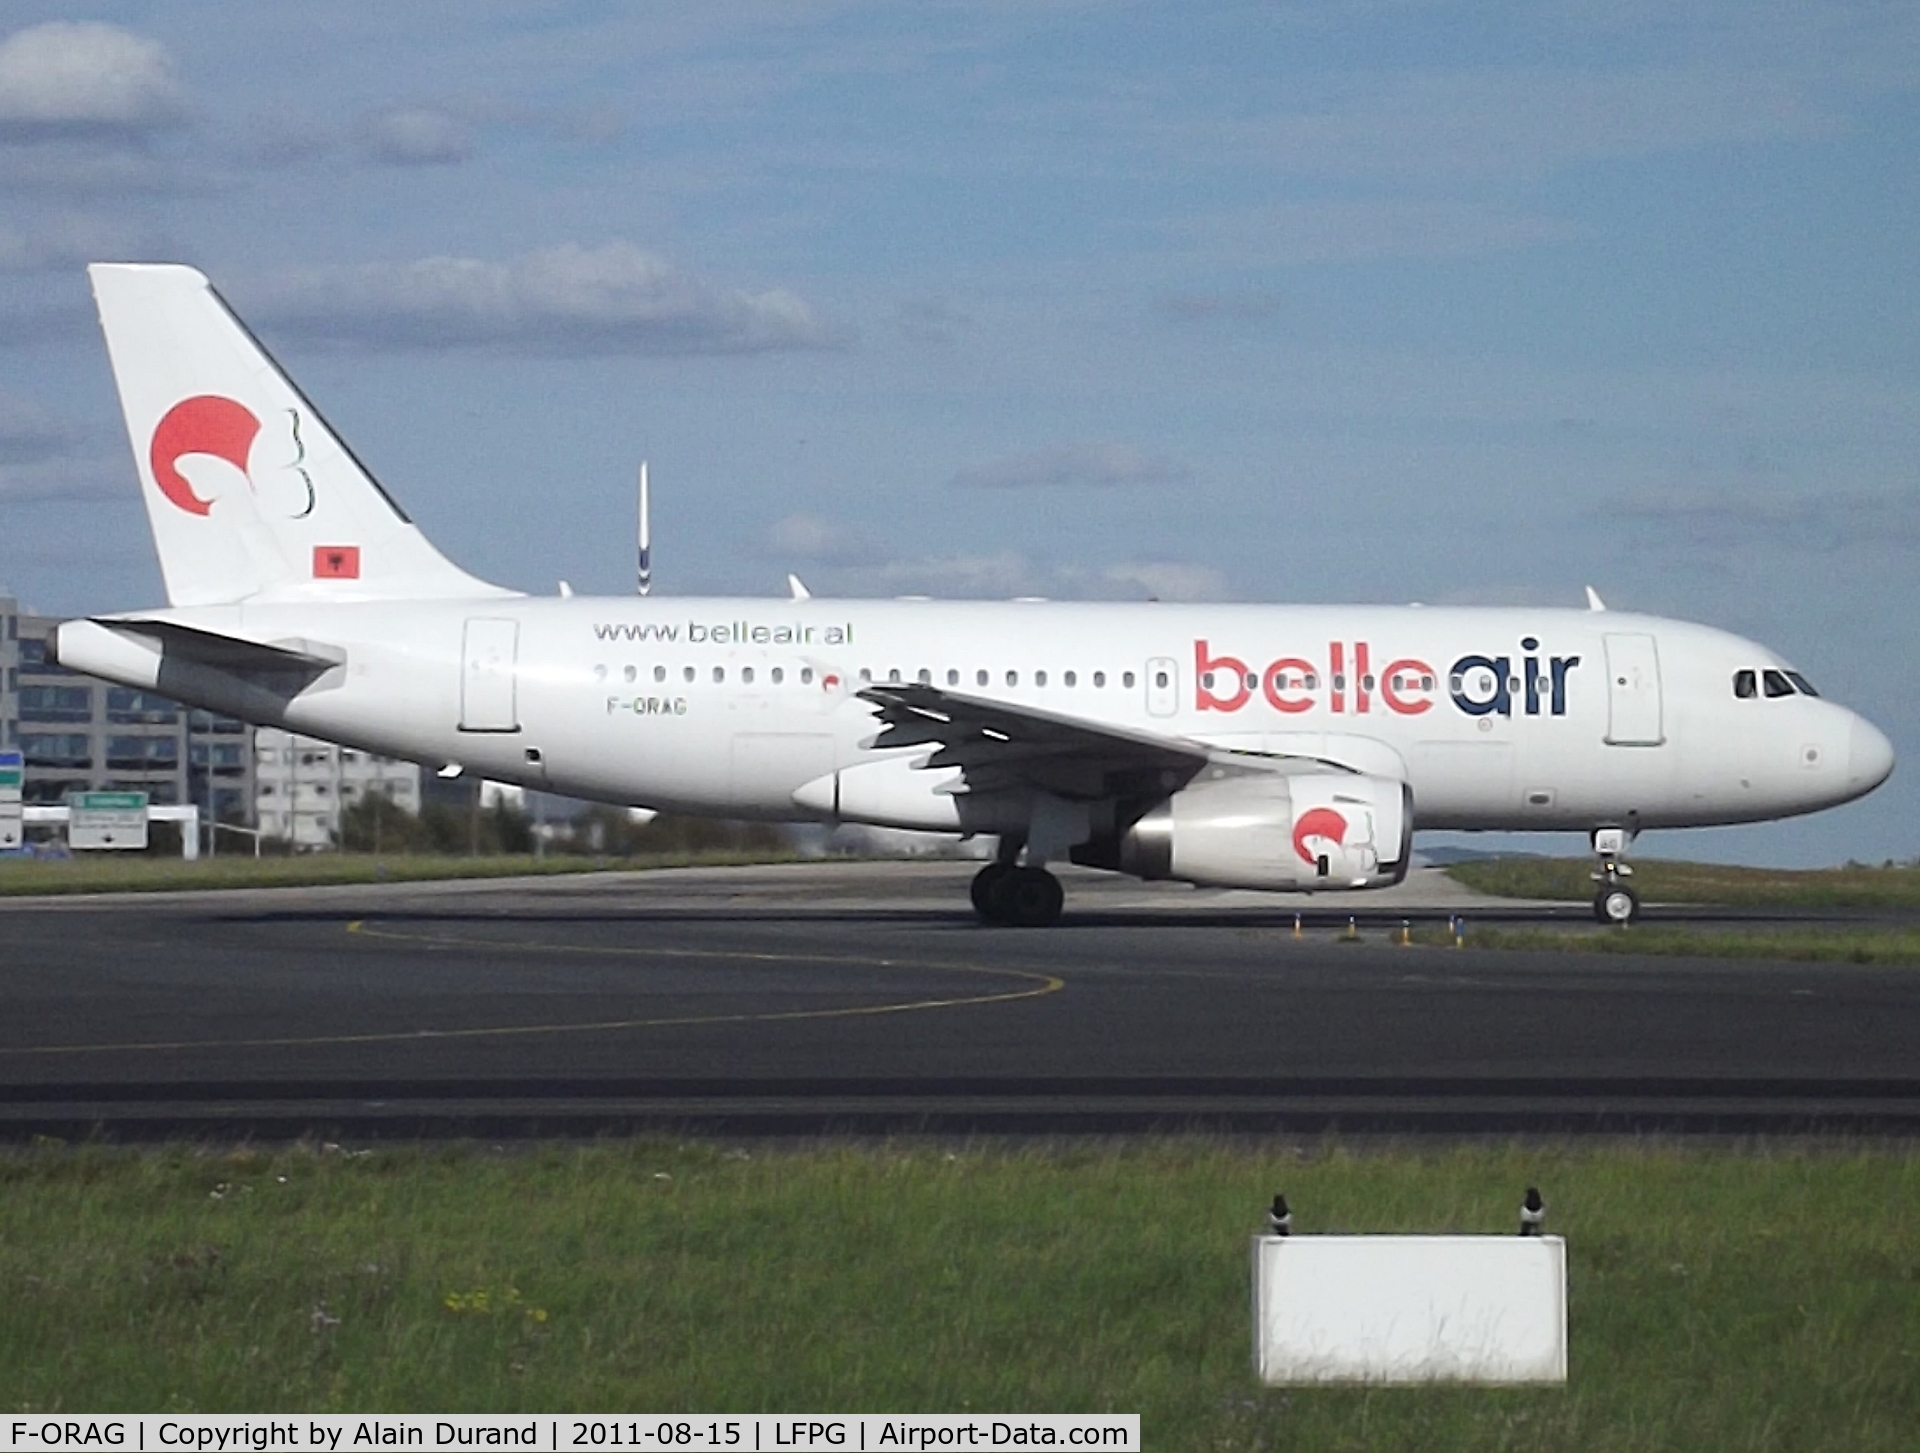 F-ORAG, 1999 Airbus A319-132 C/N 1098, Belle Air of Albania recently added CDG on its route map